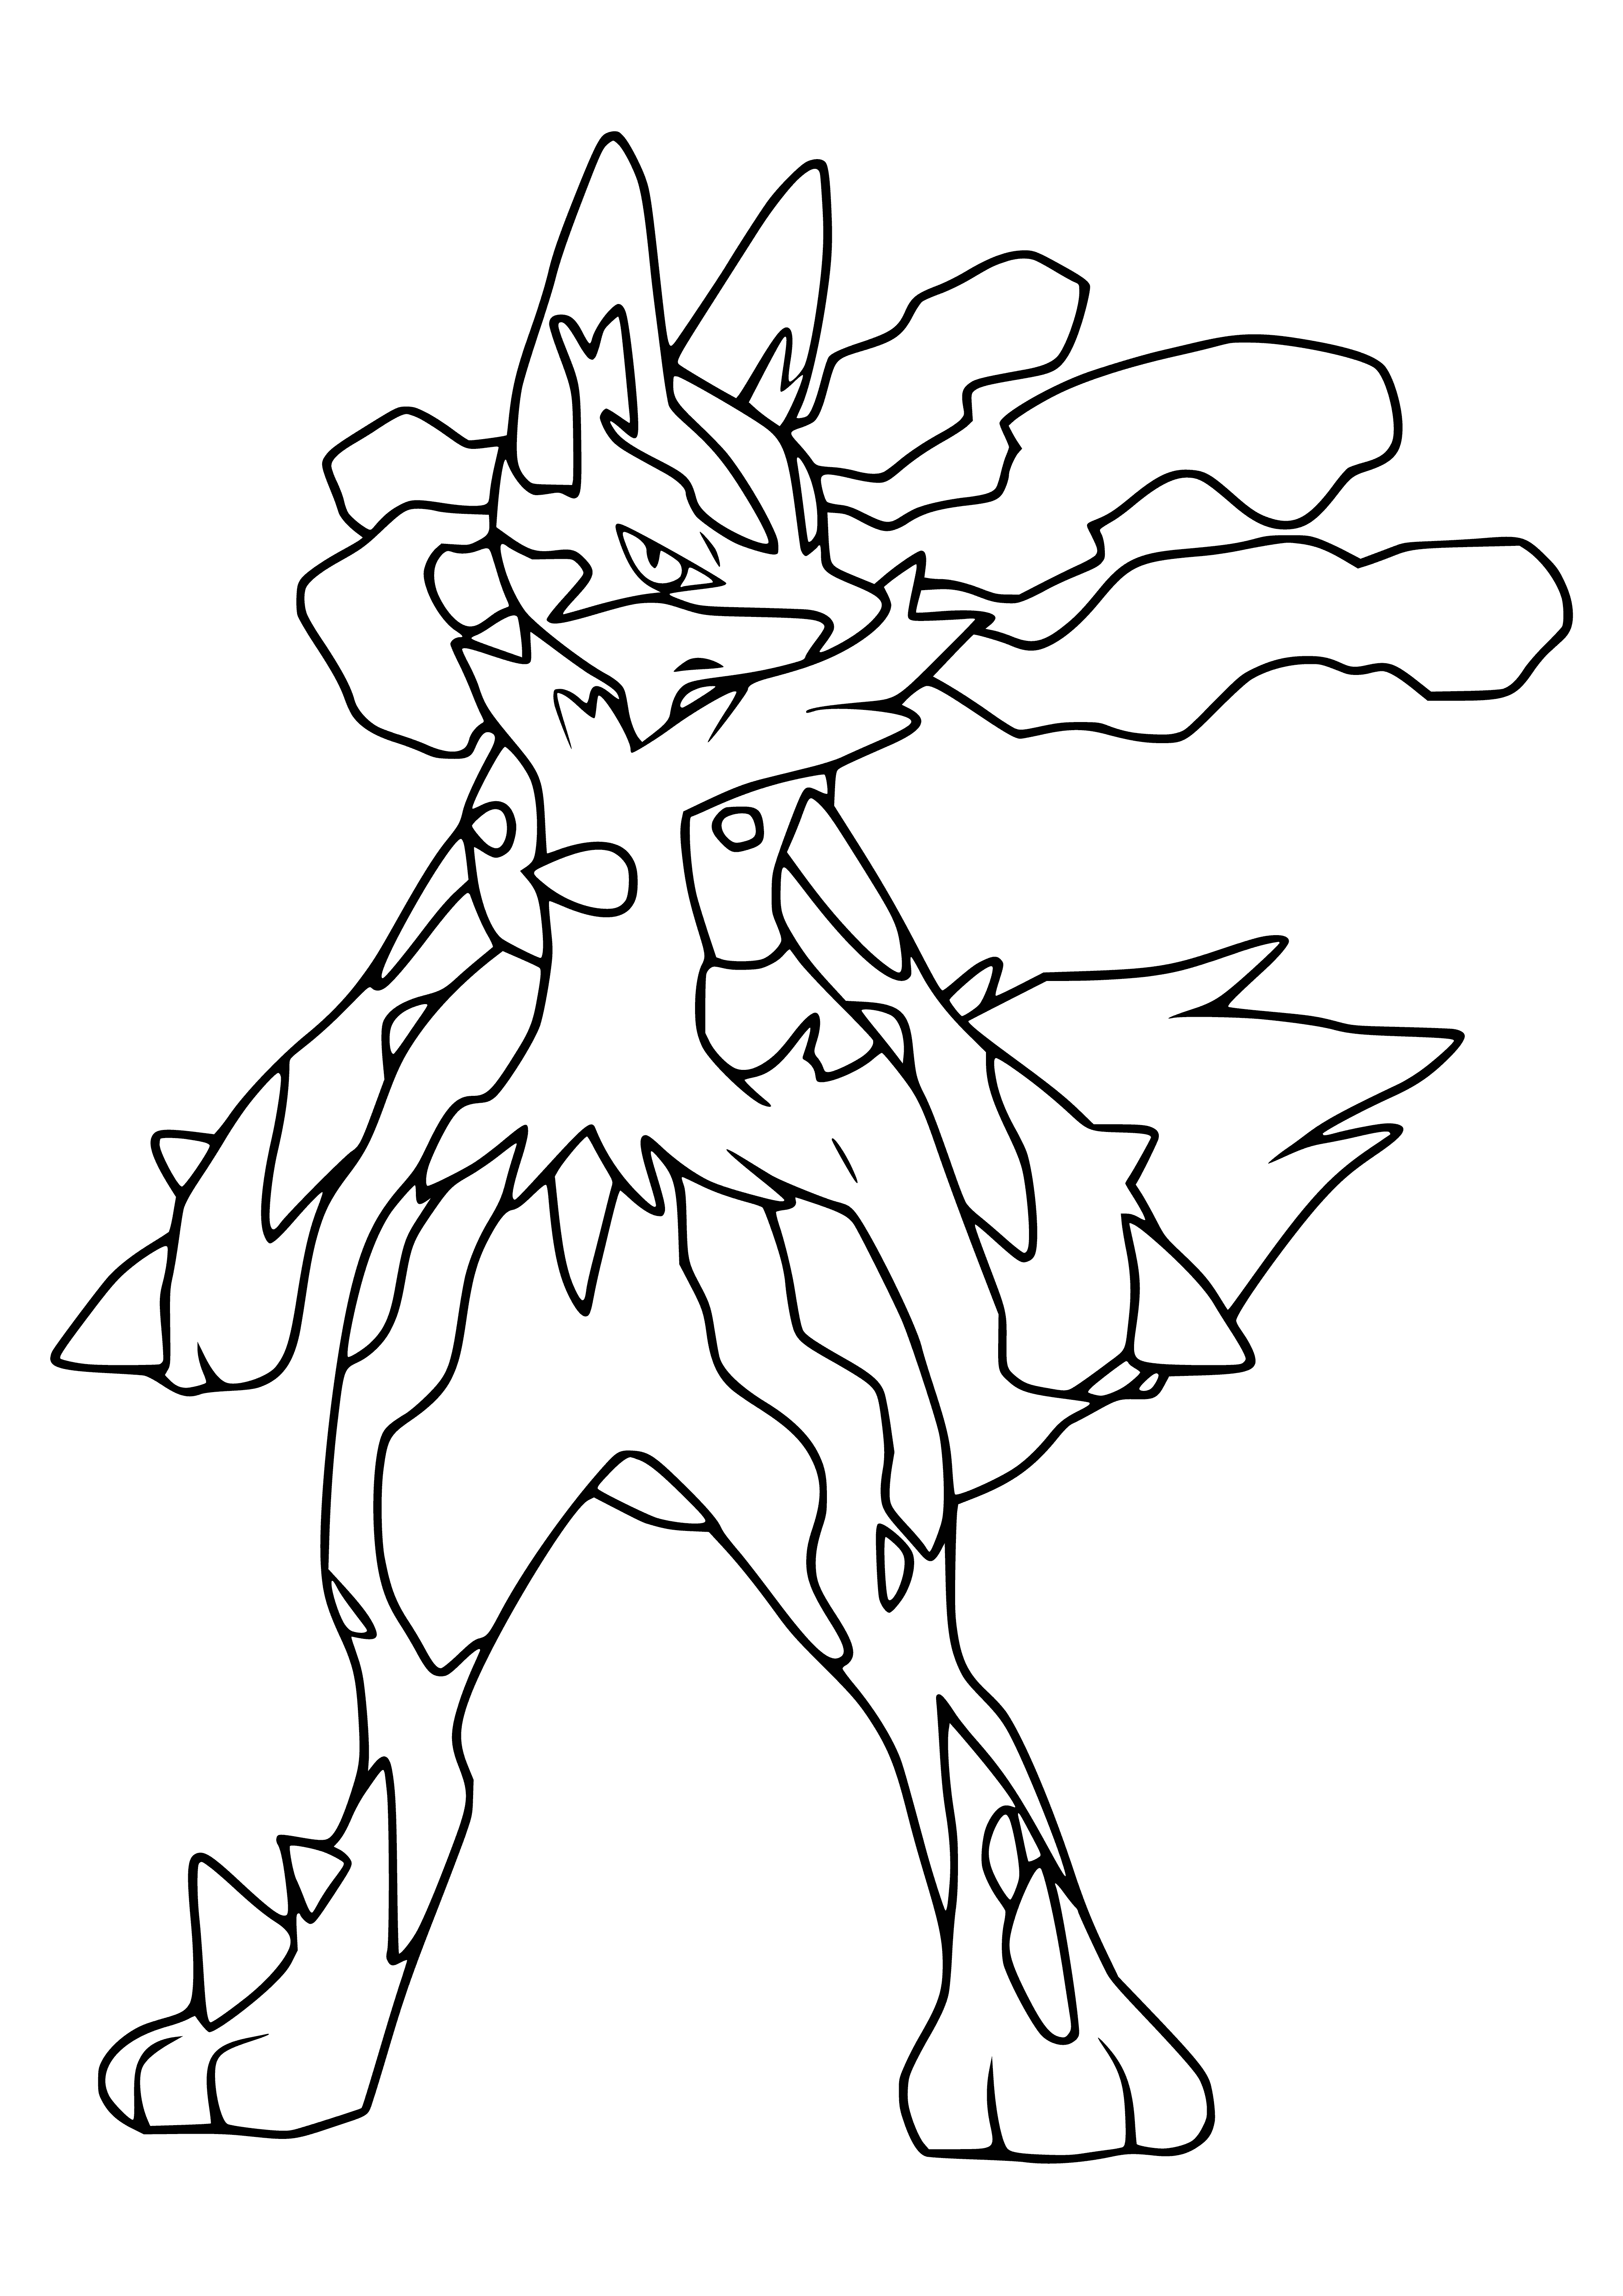 coloring page: Coloring page of Mega Lucario – a brown & white Pokémon w/ long tail, large ears, black nose, and red eyes wearing a blue & white cape.